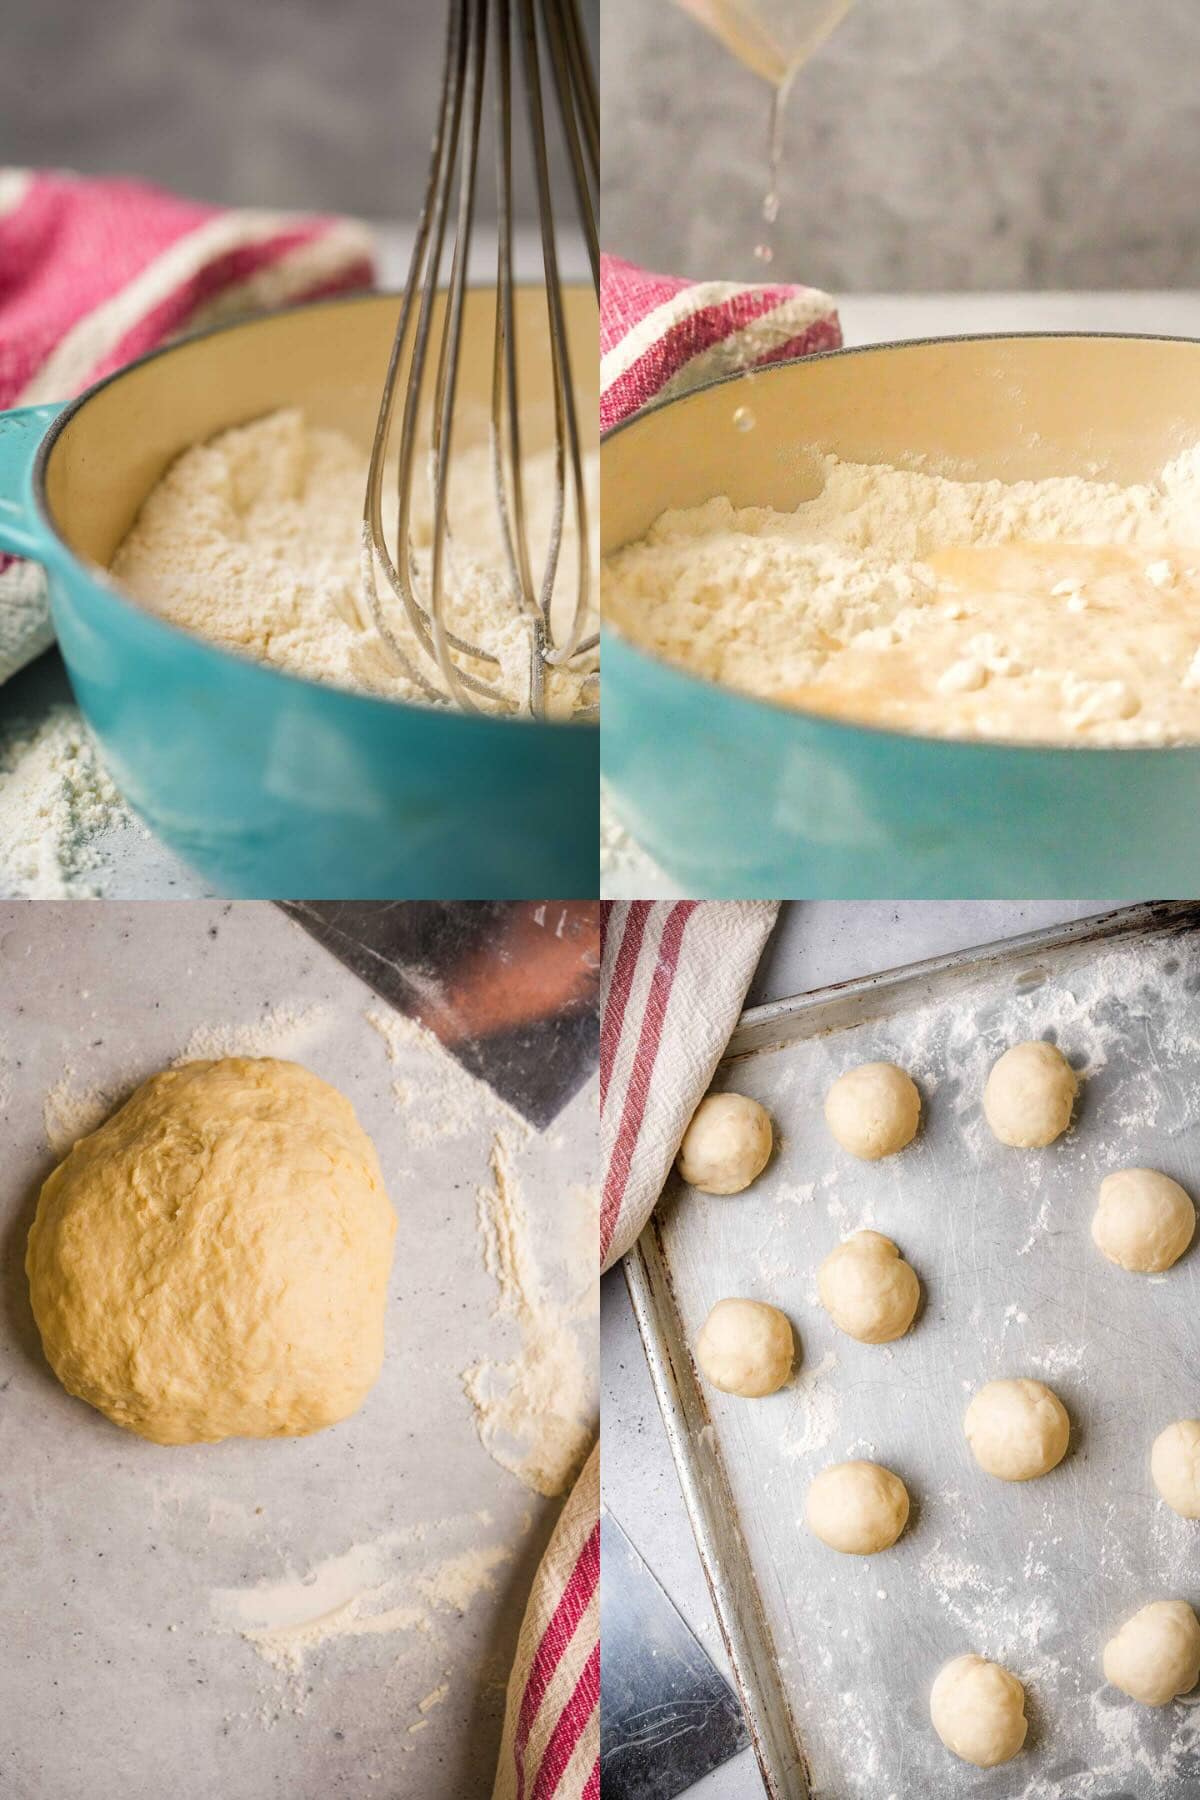 A collage of photos showing how dough is made. step 1: A bowl of flour with a whisk in it. Step 2: A pitcher of wet ingredients is being poured into a bowl of dry ingredients. Step 3: A ball of bunuelo dough on a table next to a knife. Step 4: Dough balls on a baking sheet.